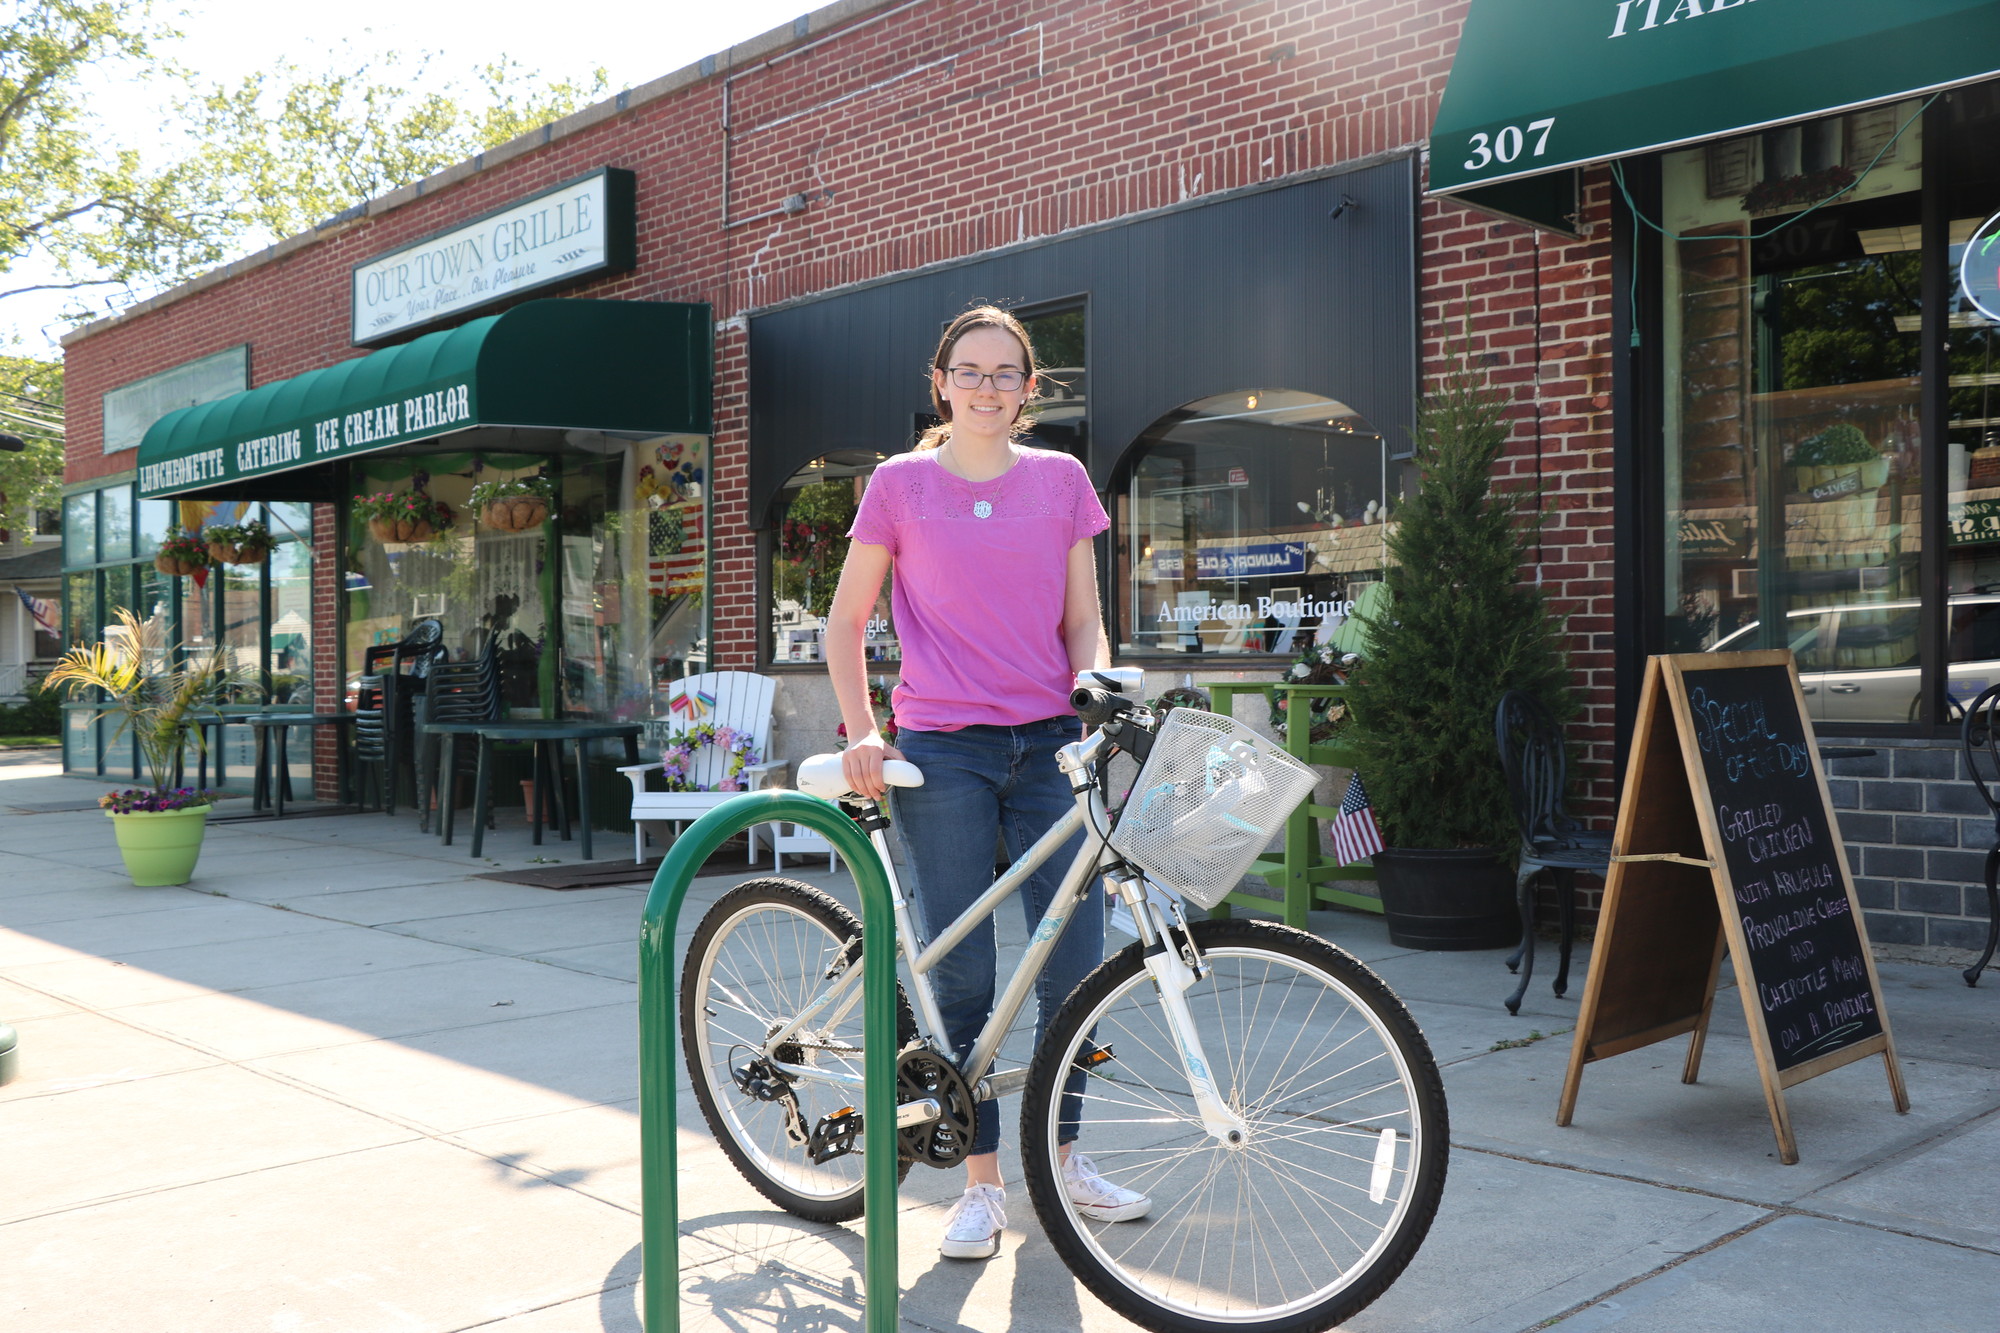 Fourteen-year-old Fiona Marren, who has raised over $1,200 for the purchase of at least 10 bike racks that will be installed on village sidewalks, with one of the racks she’d like to buy.